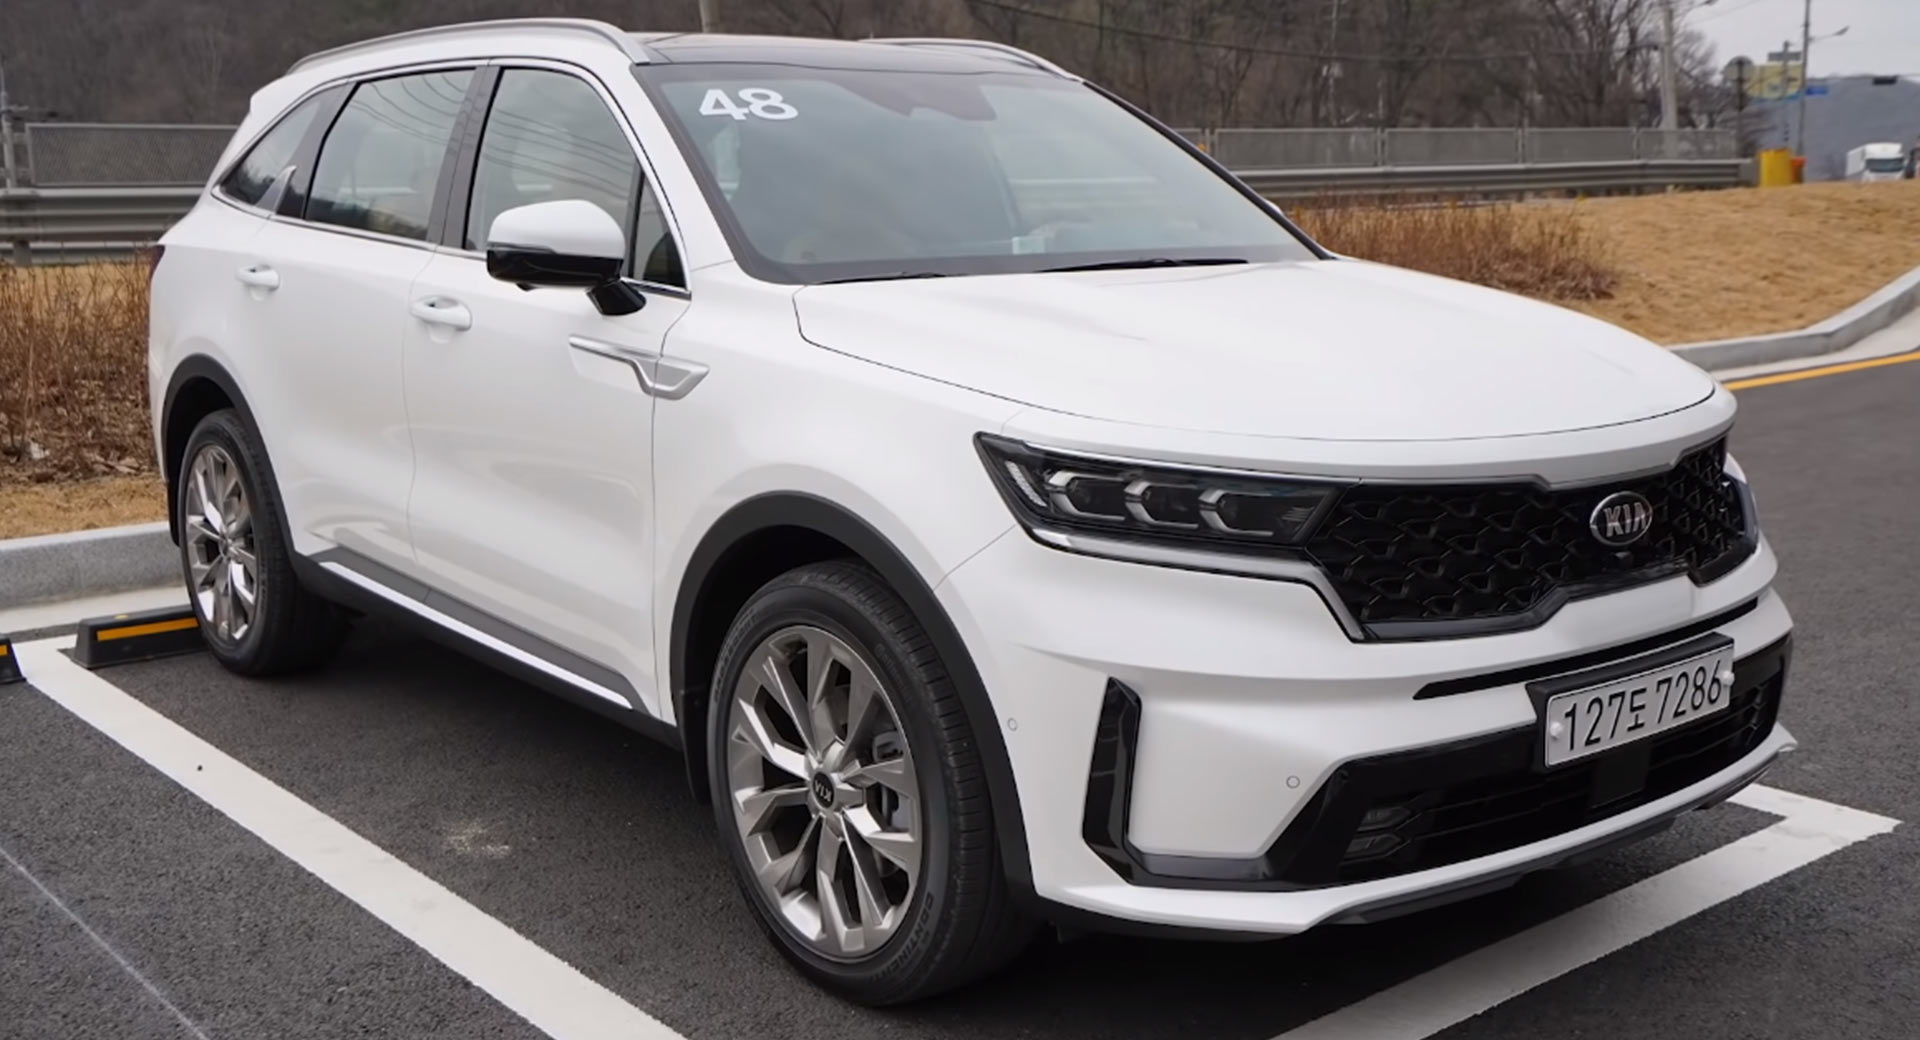 Early Review Of 2021 Kia Sorento Has Good Things To Say - SUV Clubs